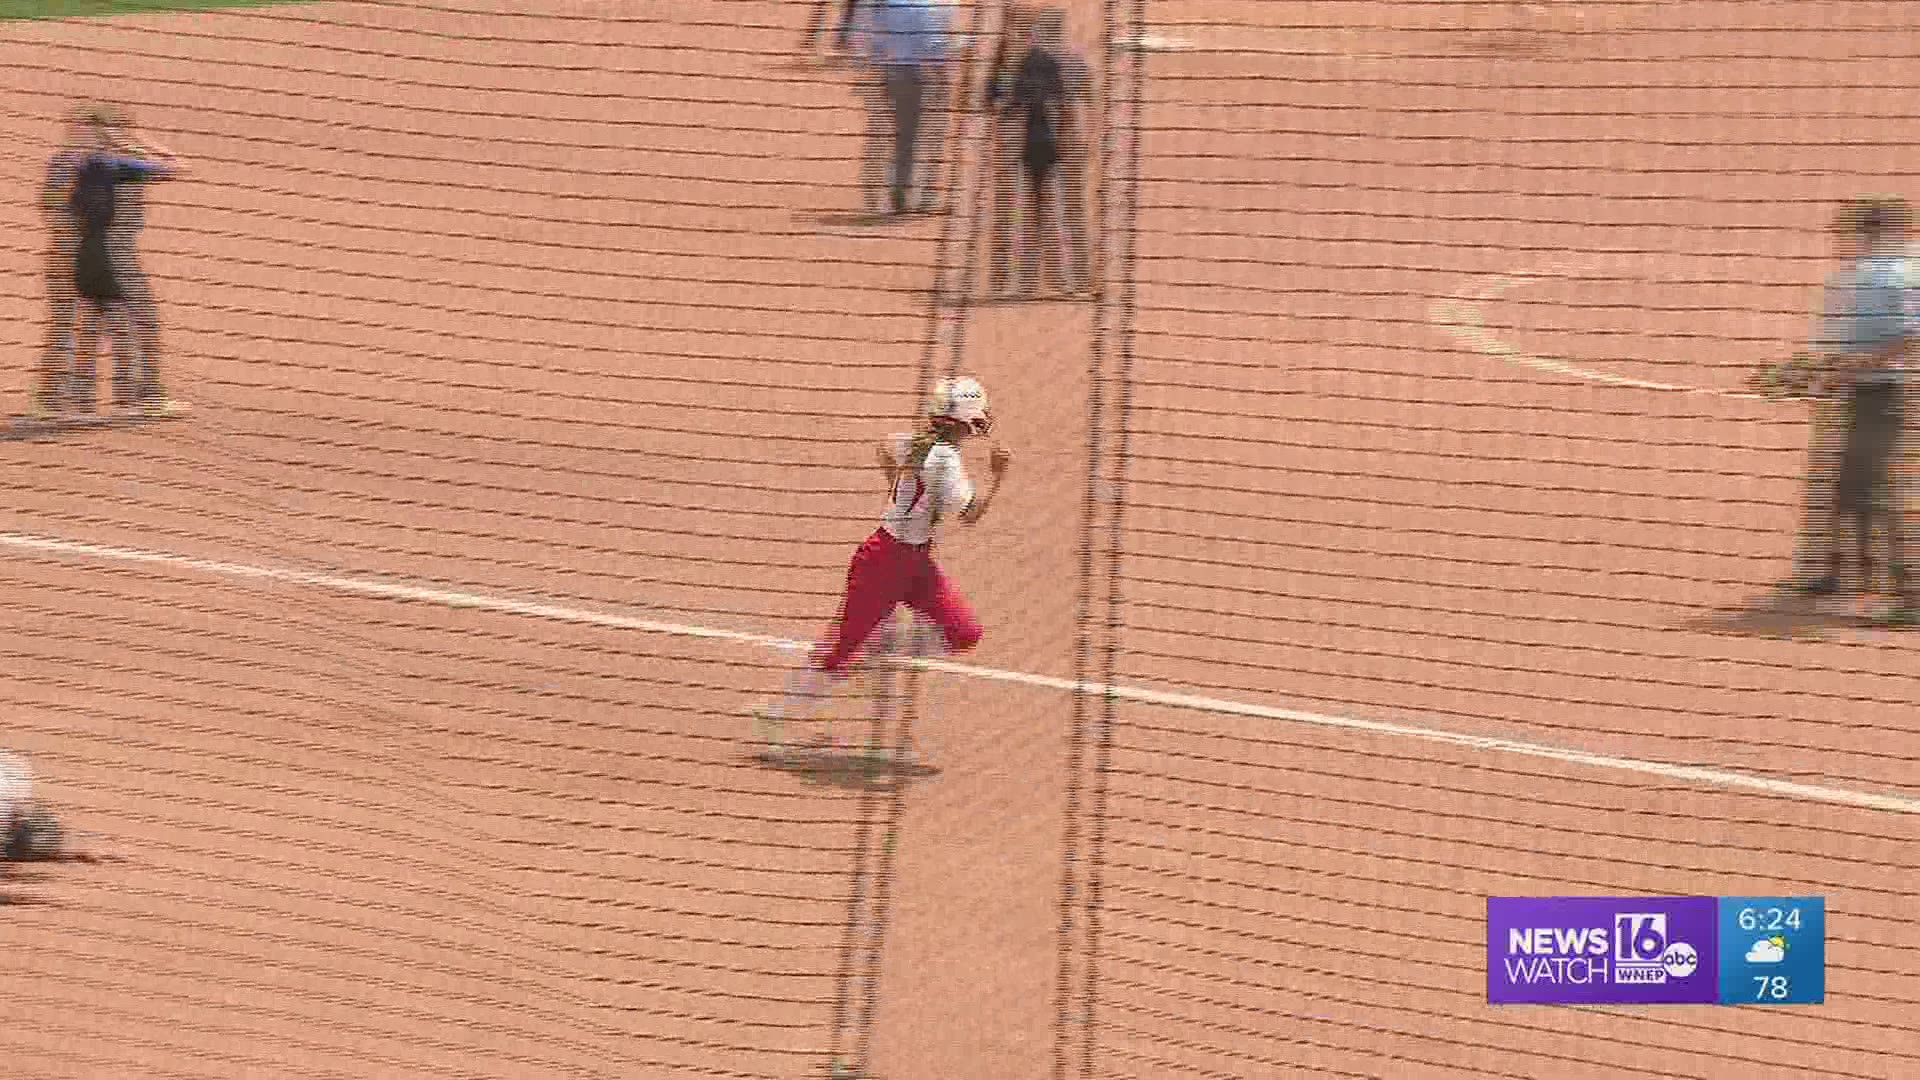 Tri-Valley gets two runs in the B-7th, to edge West Greene 3-2 to win the 'AA' HS softball state championship.